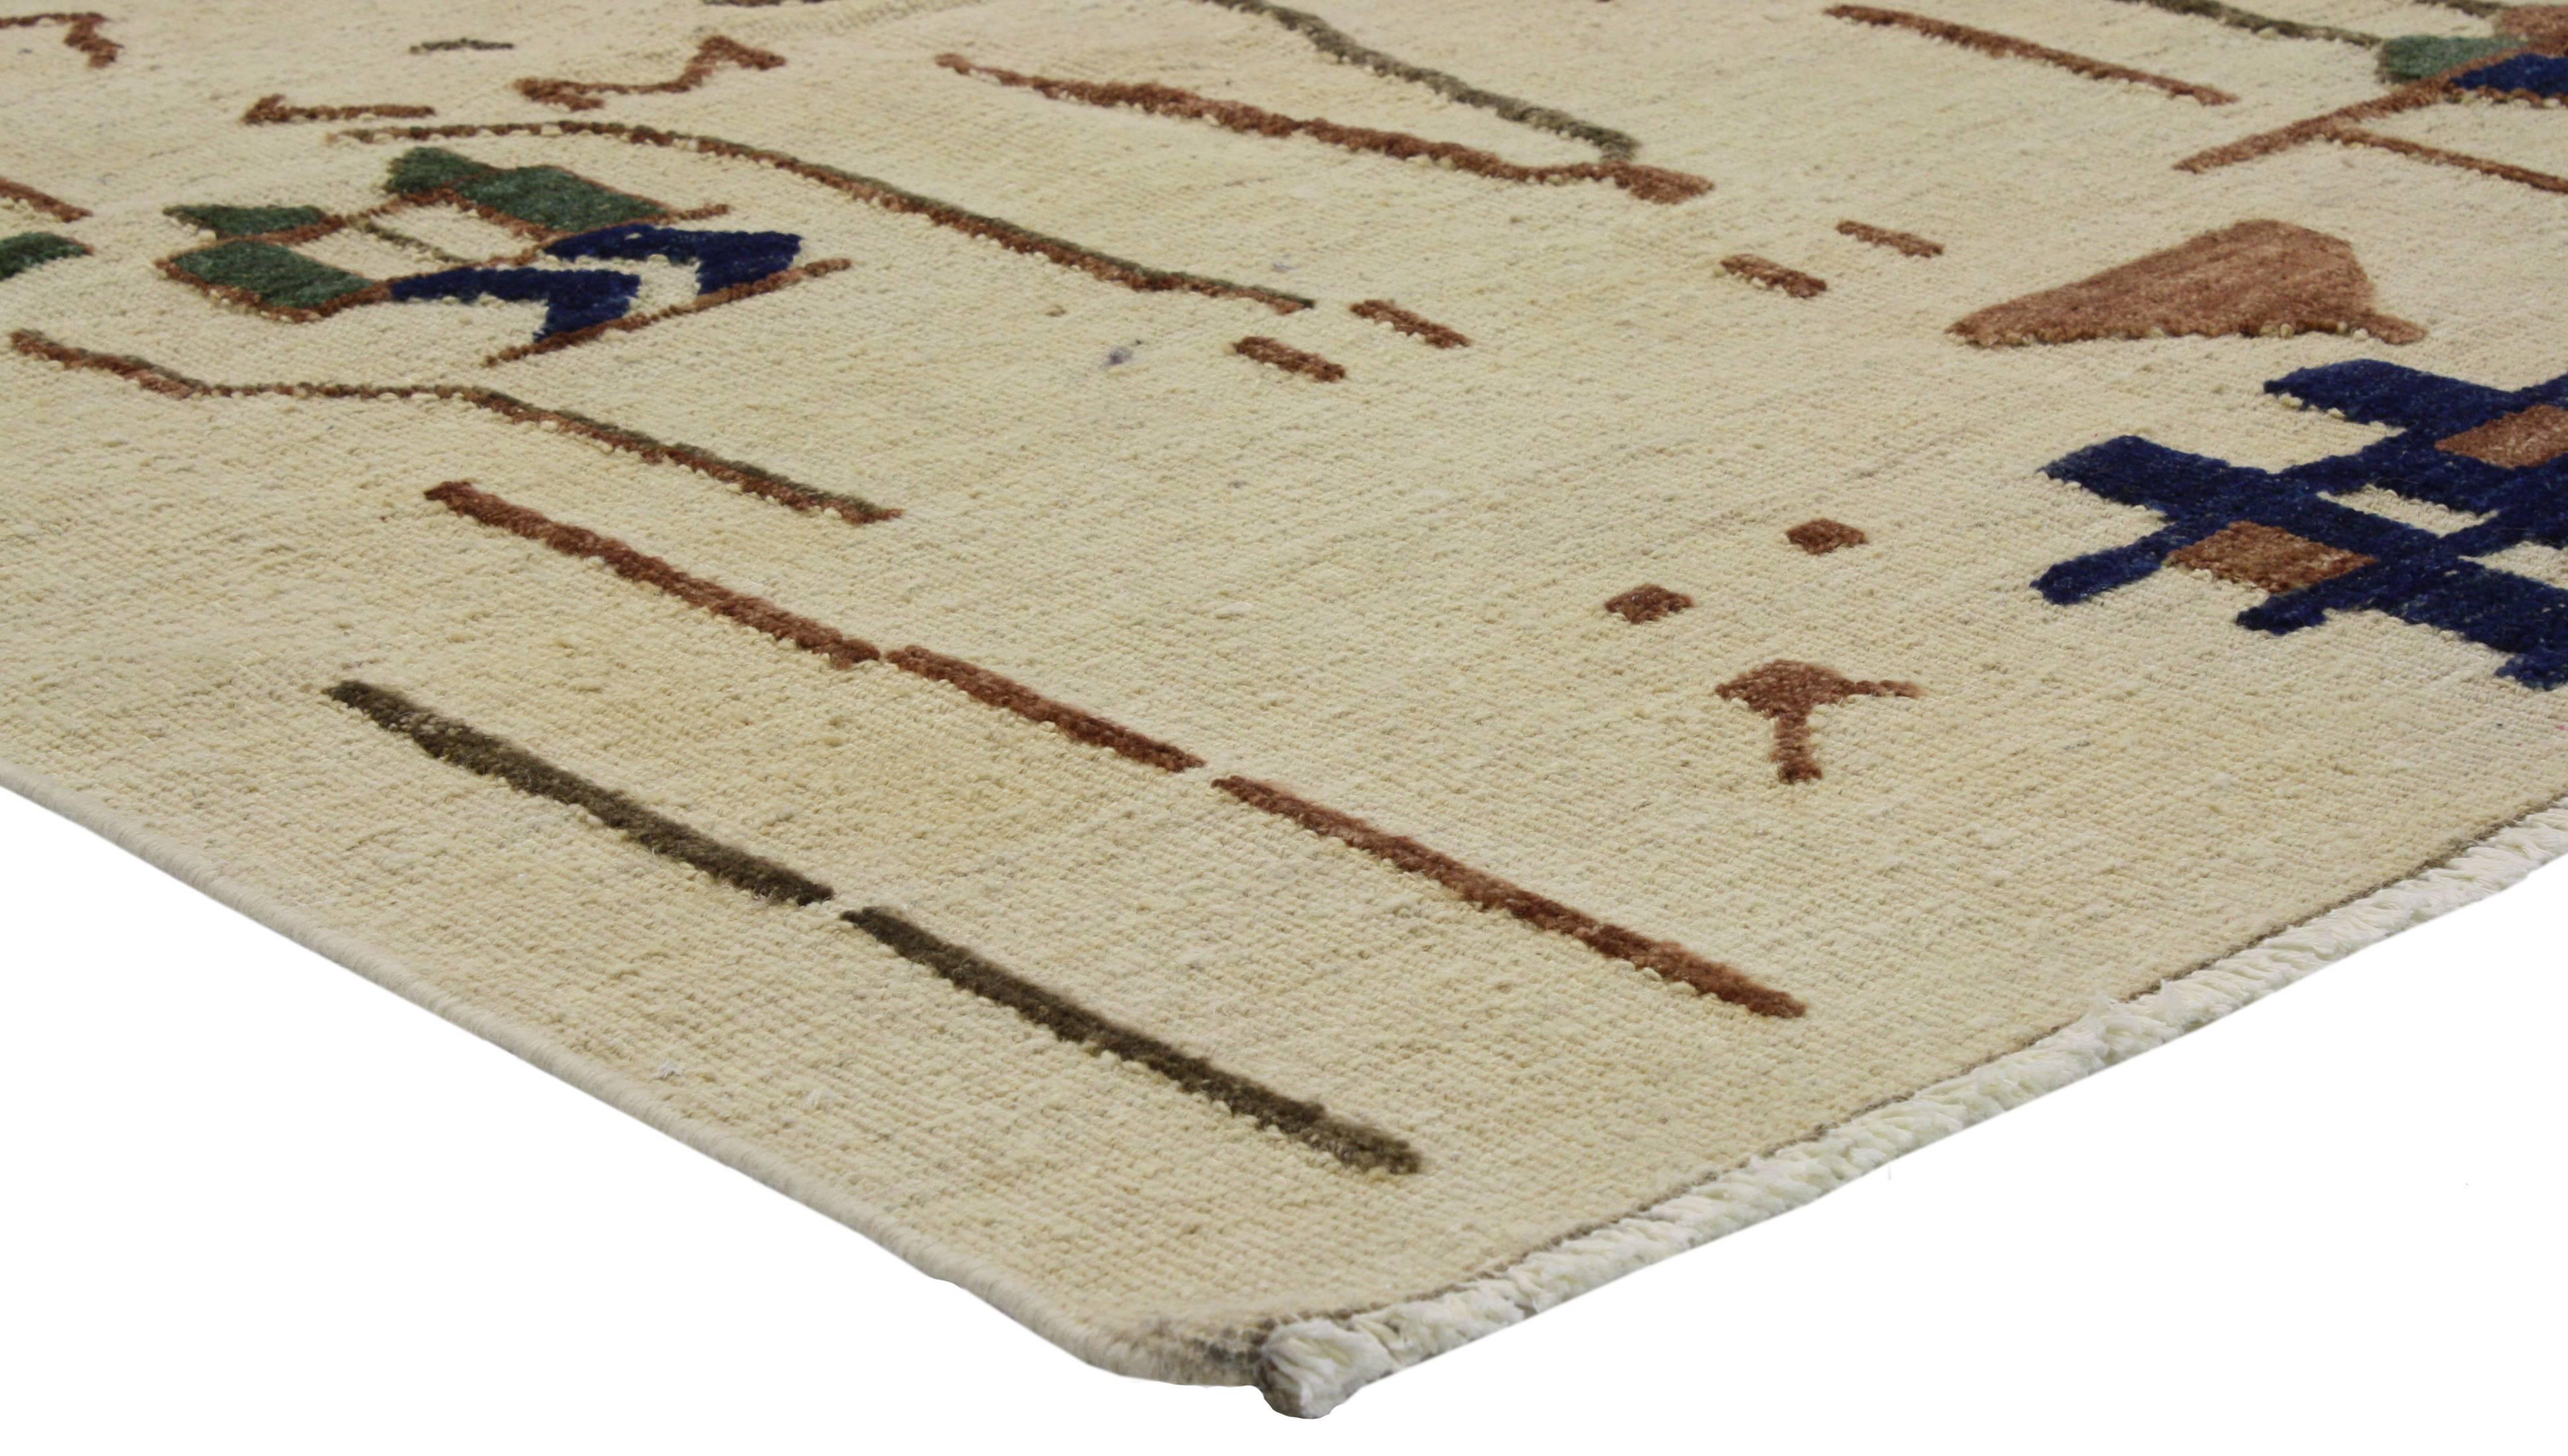 ​80284 New Contemporary Moroccan Rug with Brutalist Style after Harry Bertoia, Texture Area Rug 04'01 x 06'01. Recalling the Brutalist influence of mid-century designer Harry Bertoia (1915-1978), this contemporary Moroccan style rug is an amalgam of